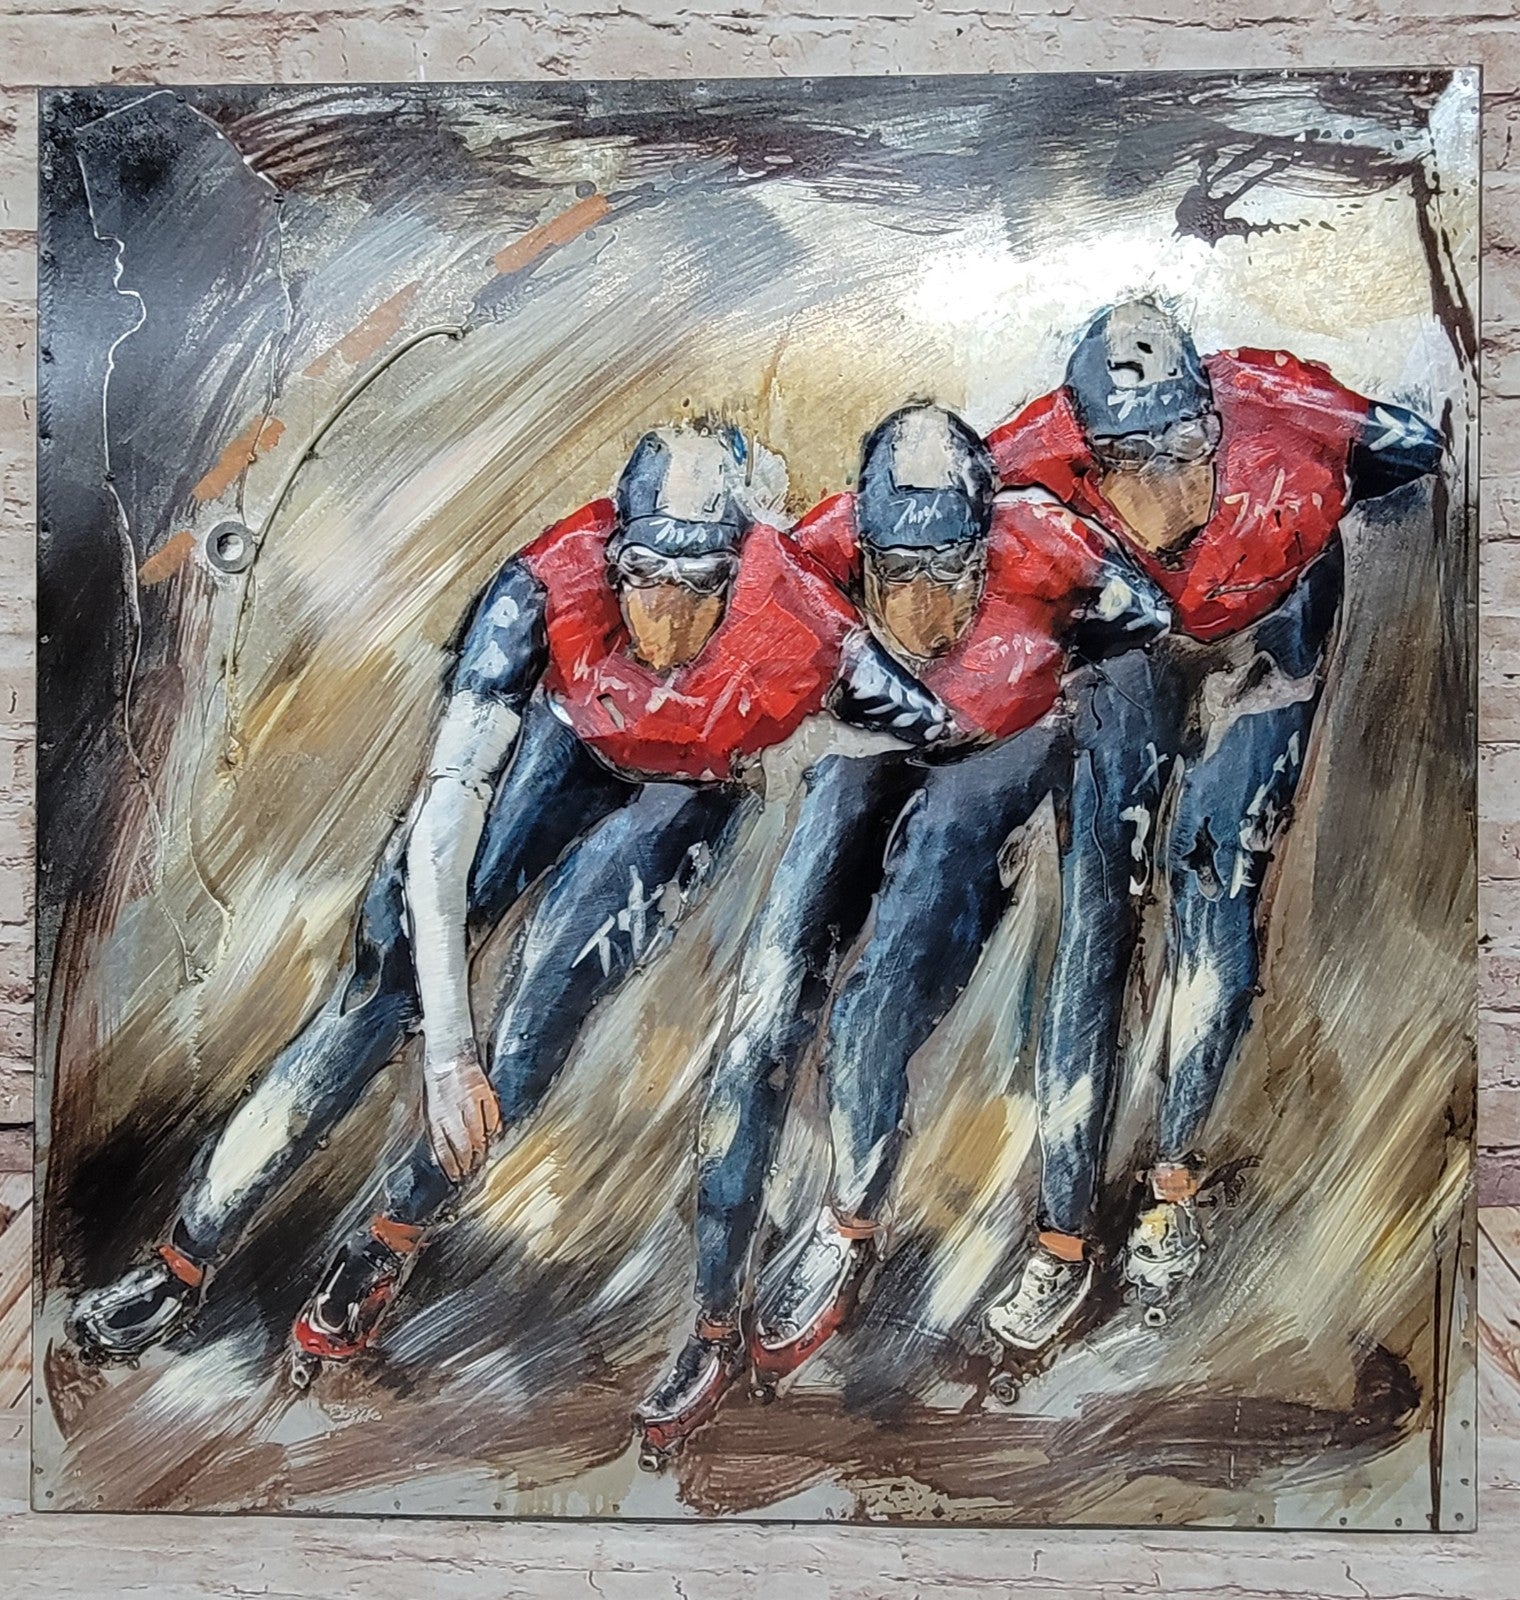 Competition in team work on Skating Roller Blading 3-D Oil Painting 32 by 32 inches